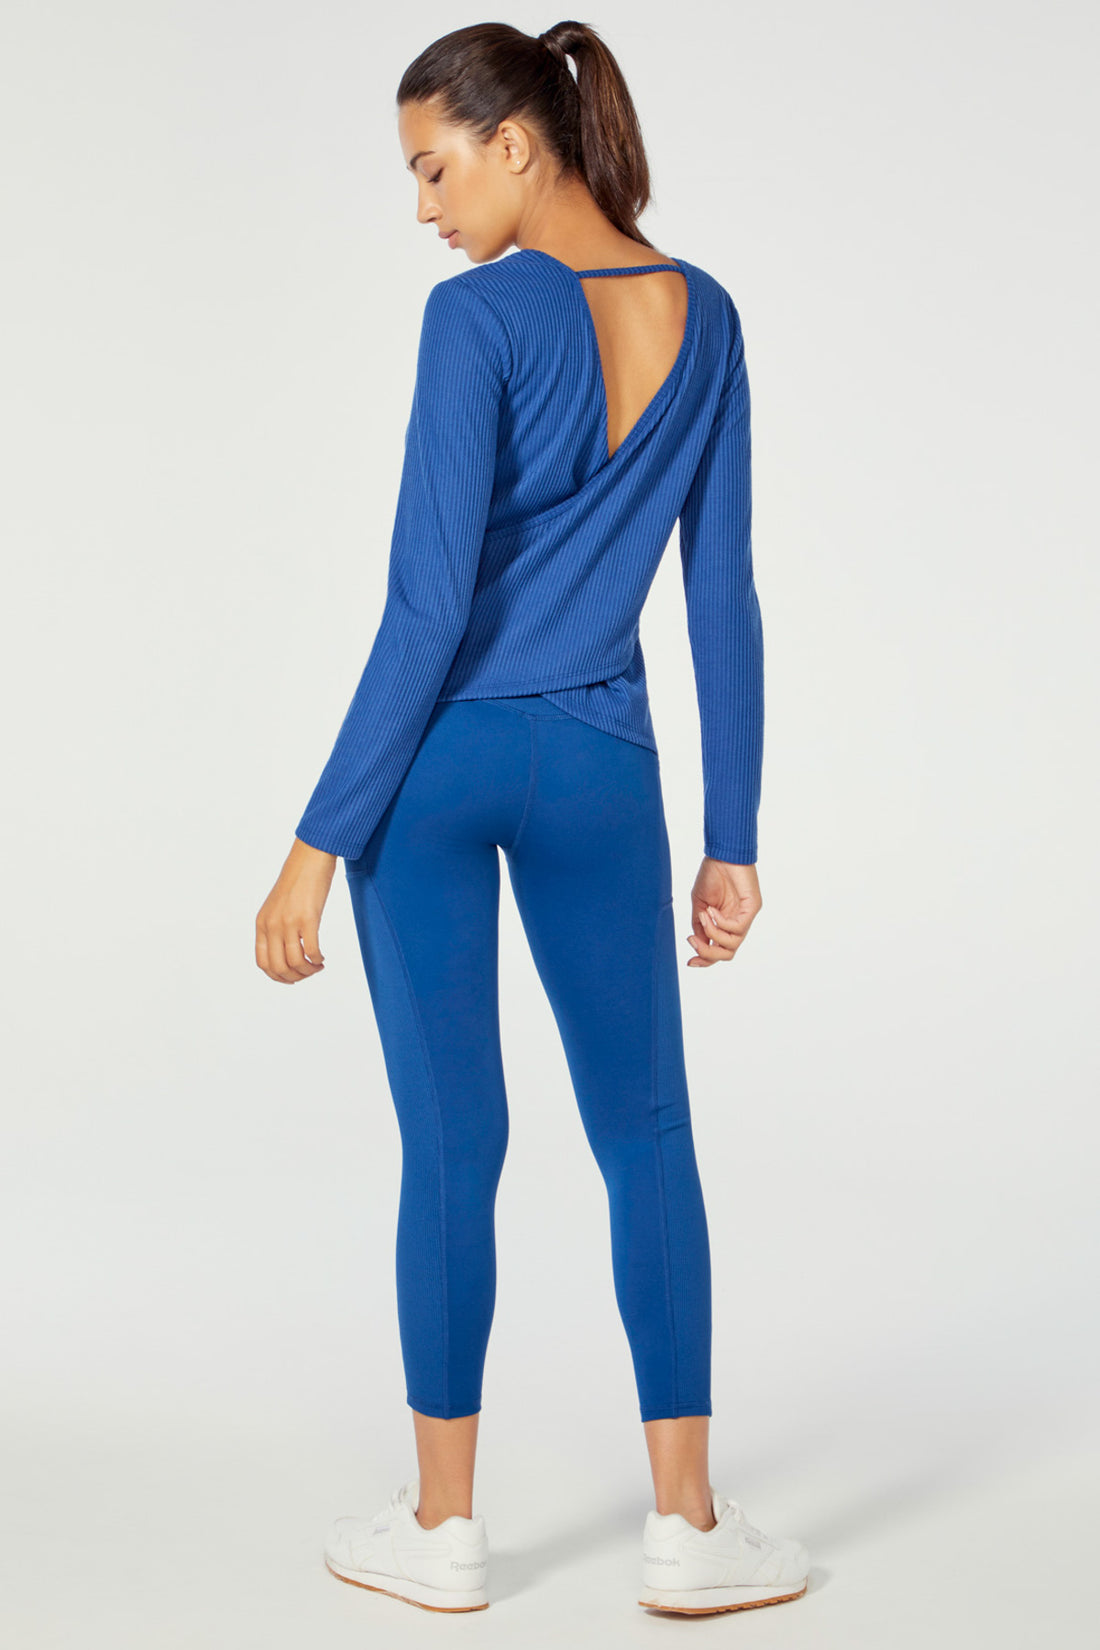 Bold In Blue - 5 Items